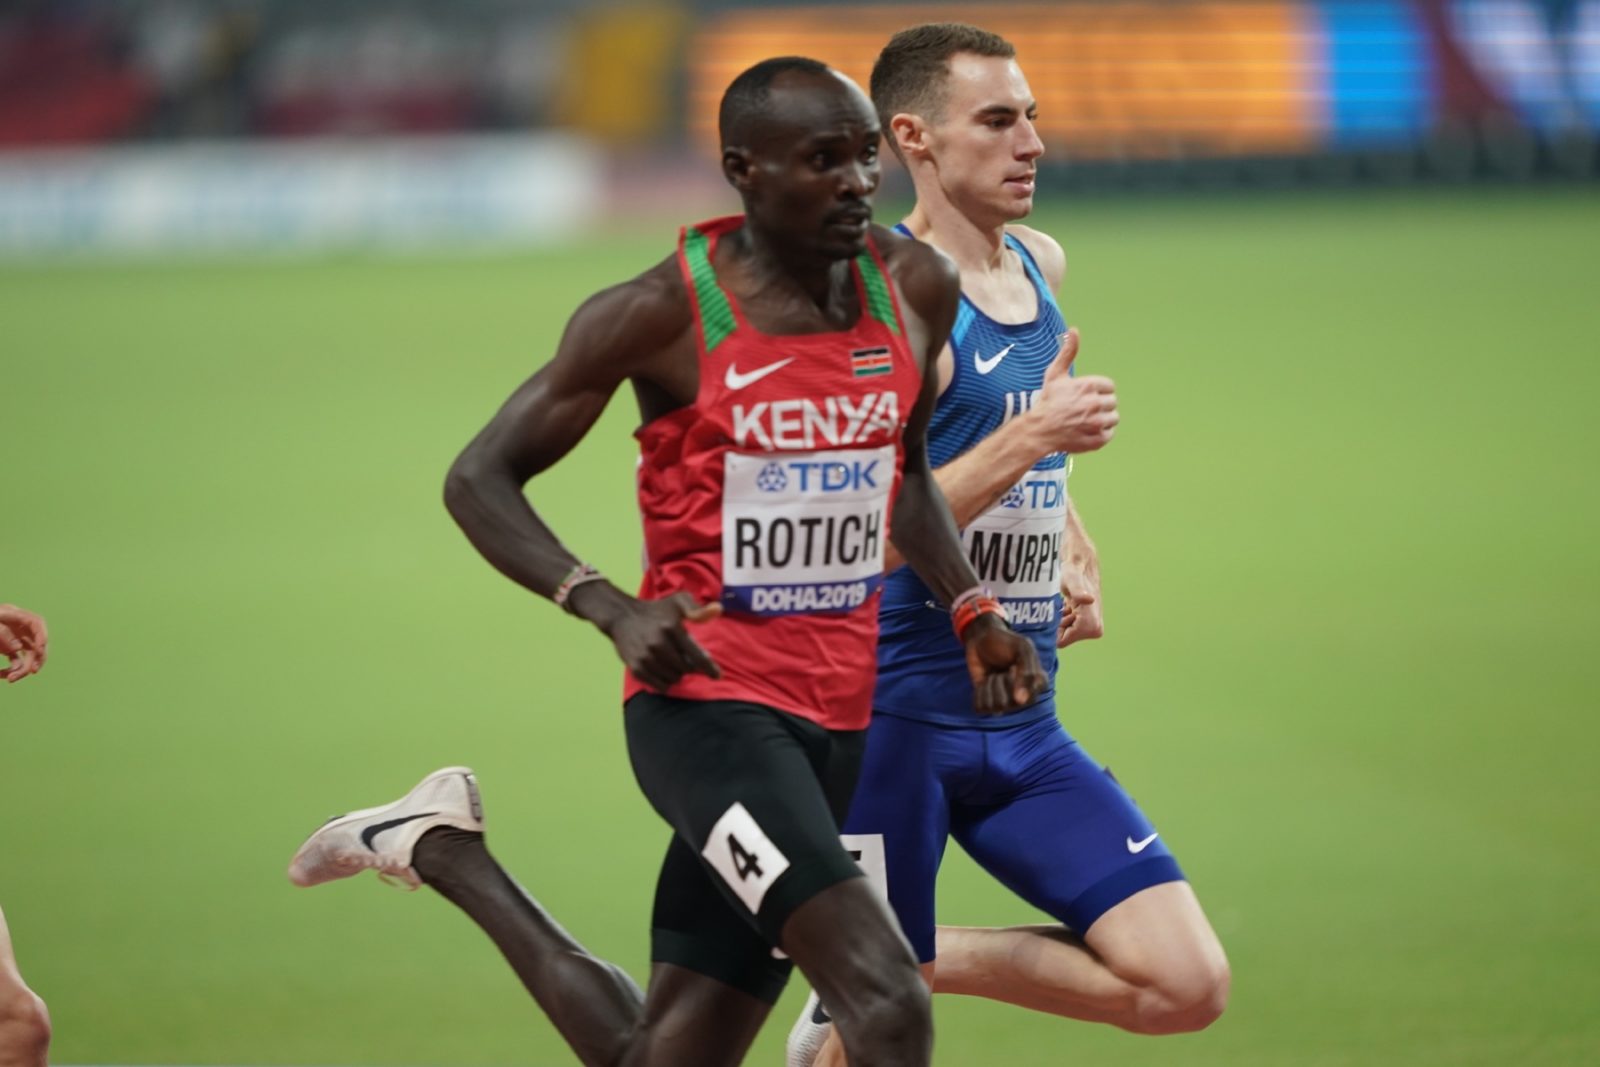 Ferguson Rotich from Kenya in men's 800m in Doha / Photo credit: Getty Images for IAAF